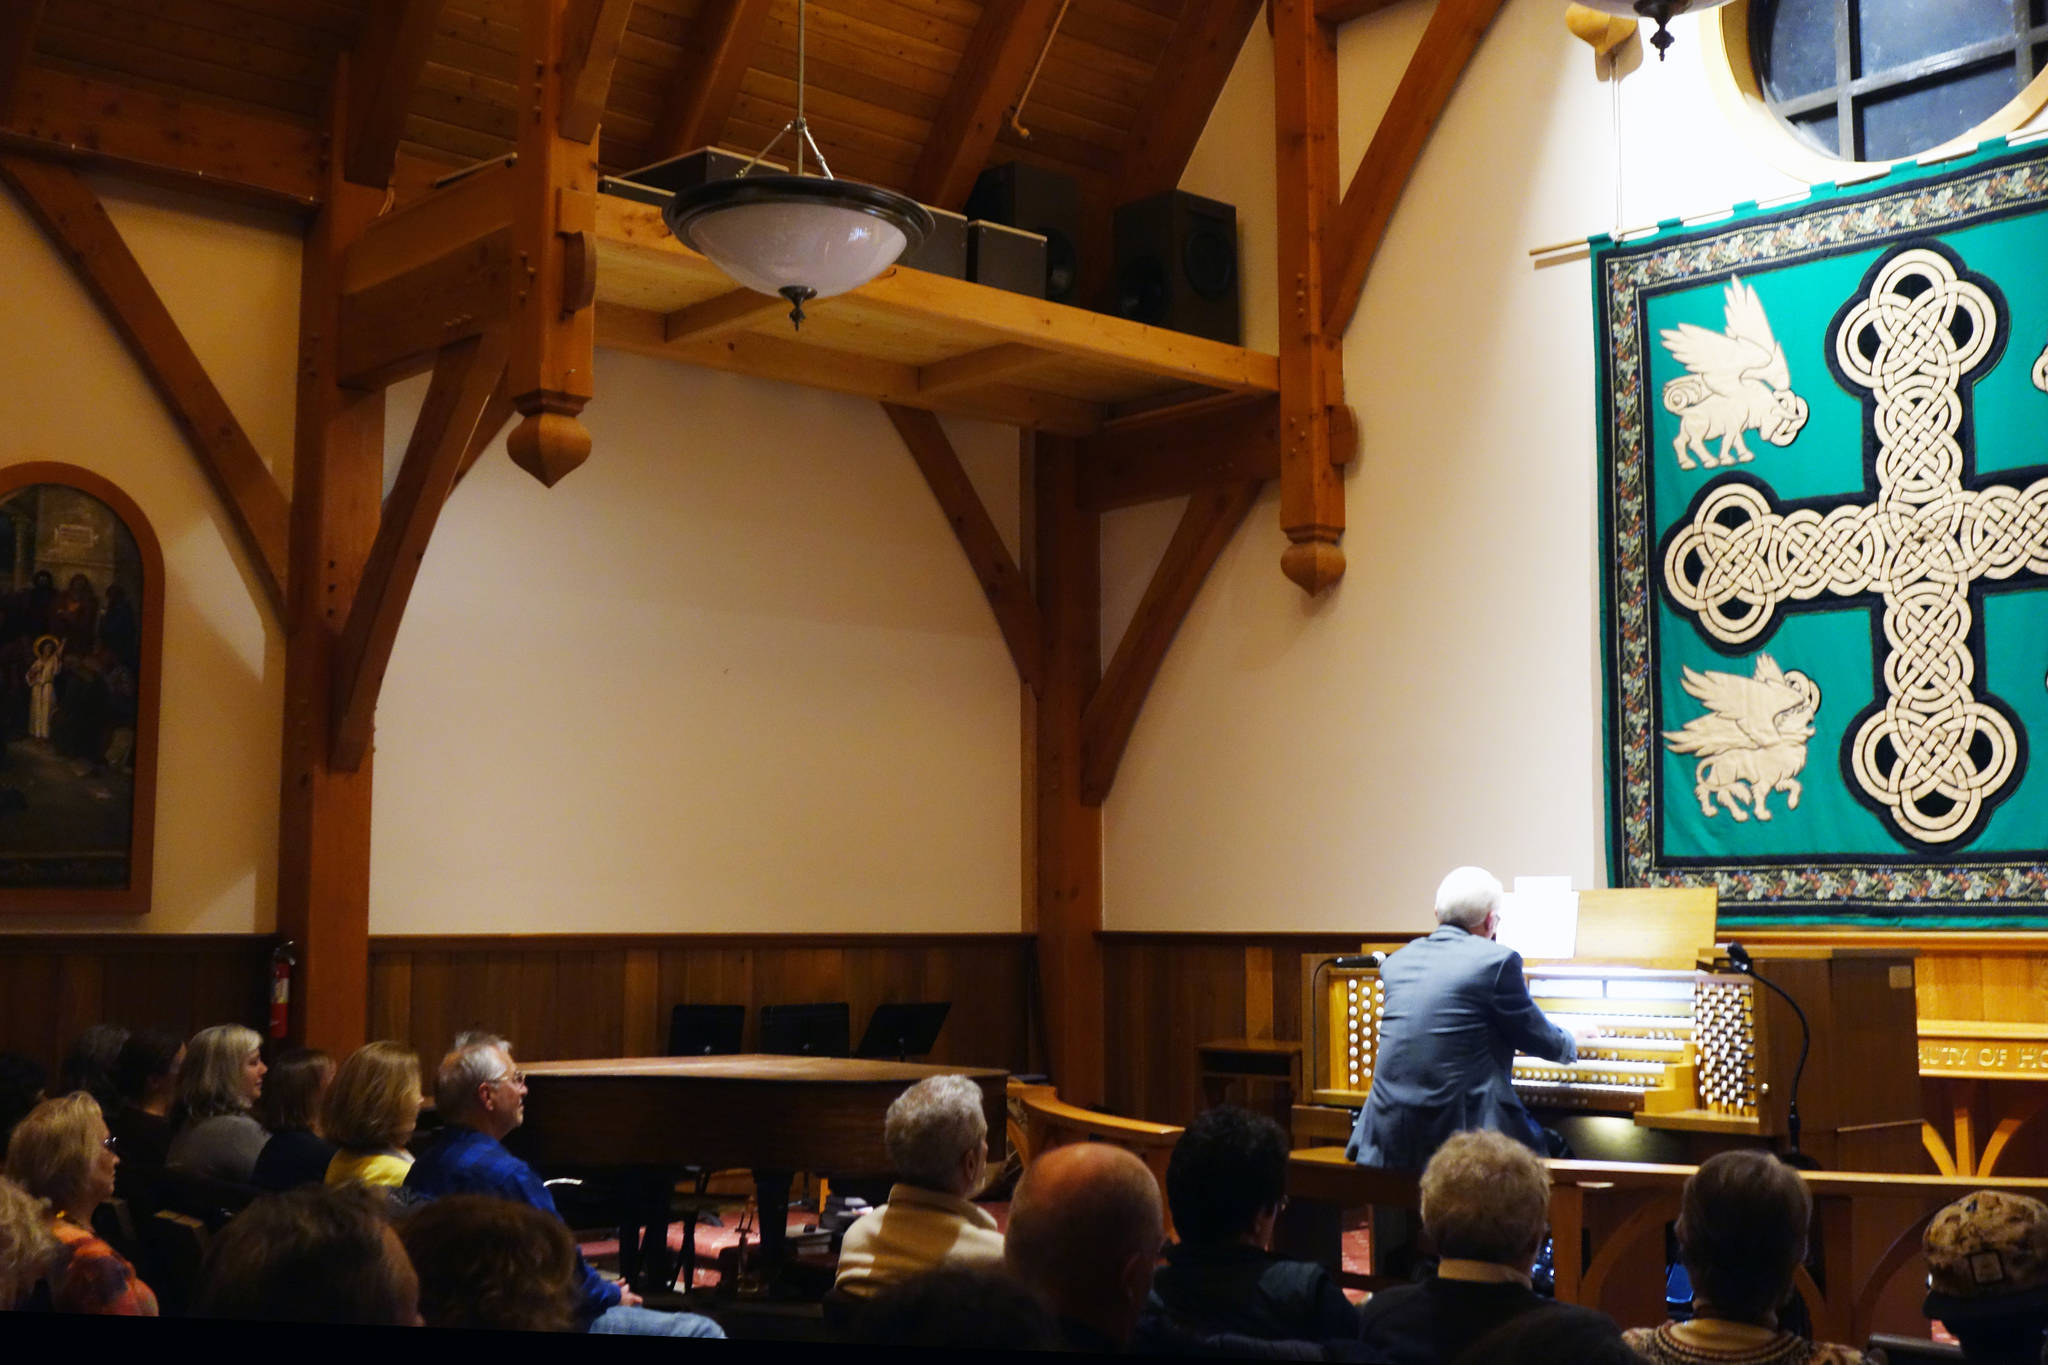 Jonas Nordwall, organist and artistic director of music for the First United Methodist Church in Portland, Oregon, performs Friday, Nov. 15. Special lofts were built to hold speakers that The event attracted a crowd to Holy Trinity Episcopal Church. (Ben Hohenstatt | Juneau Empire)